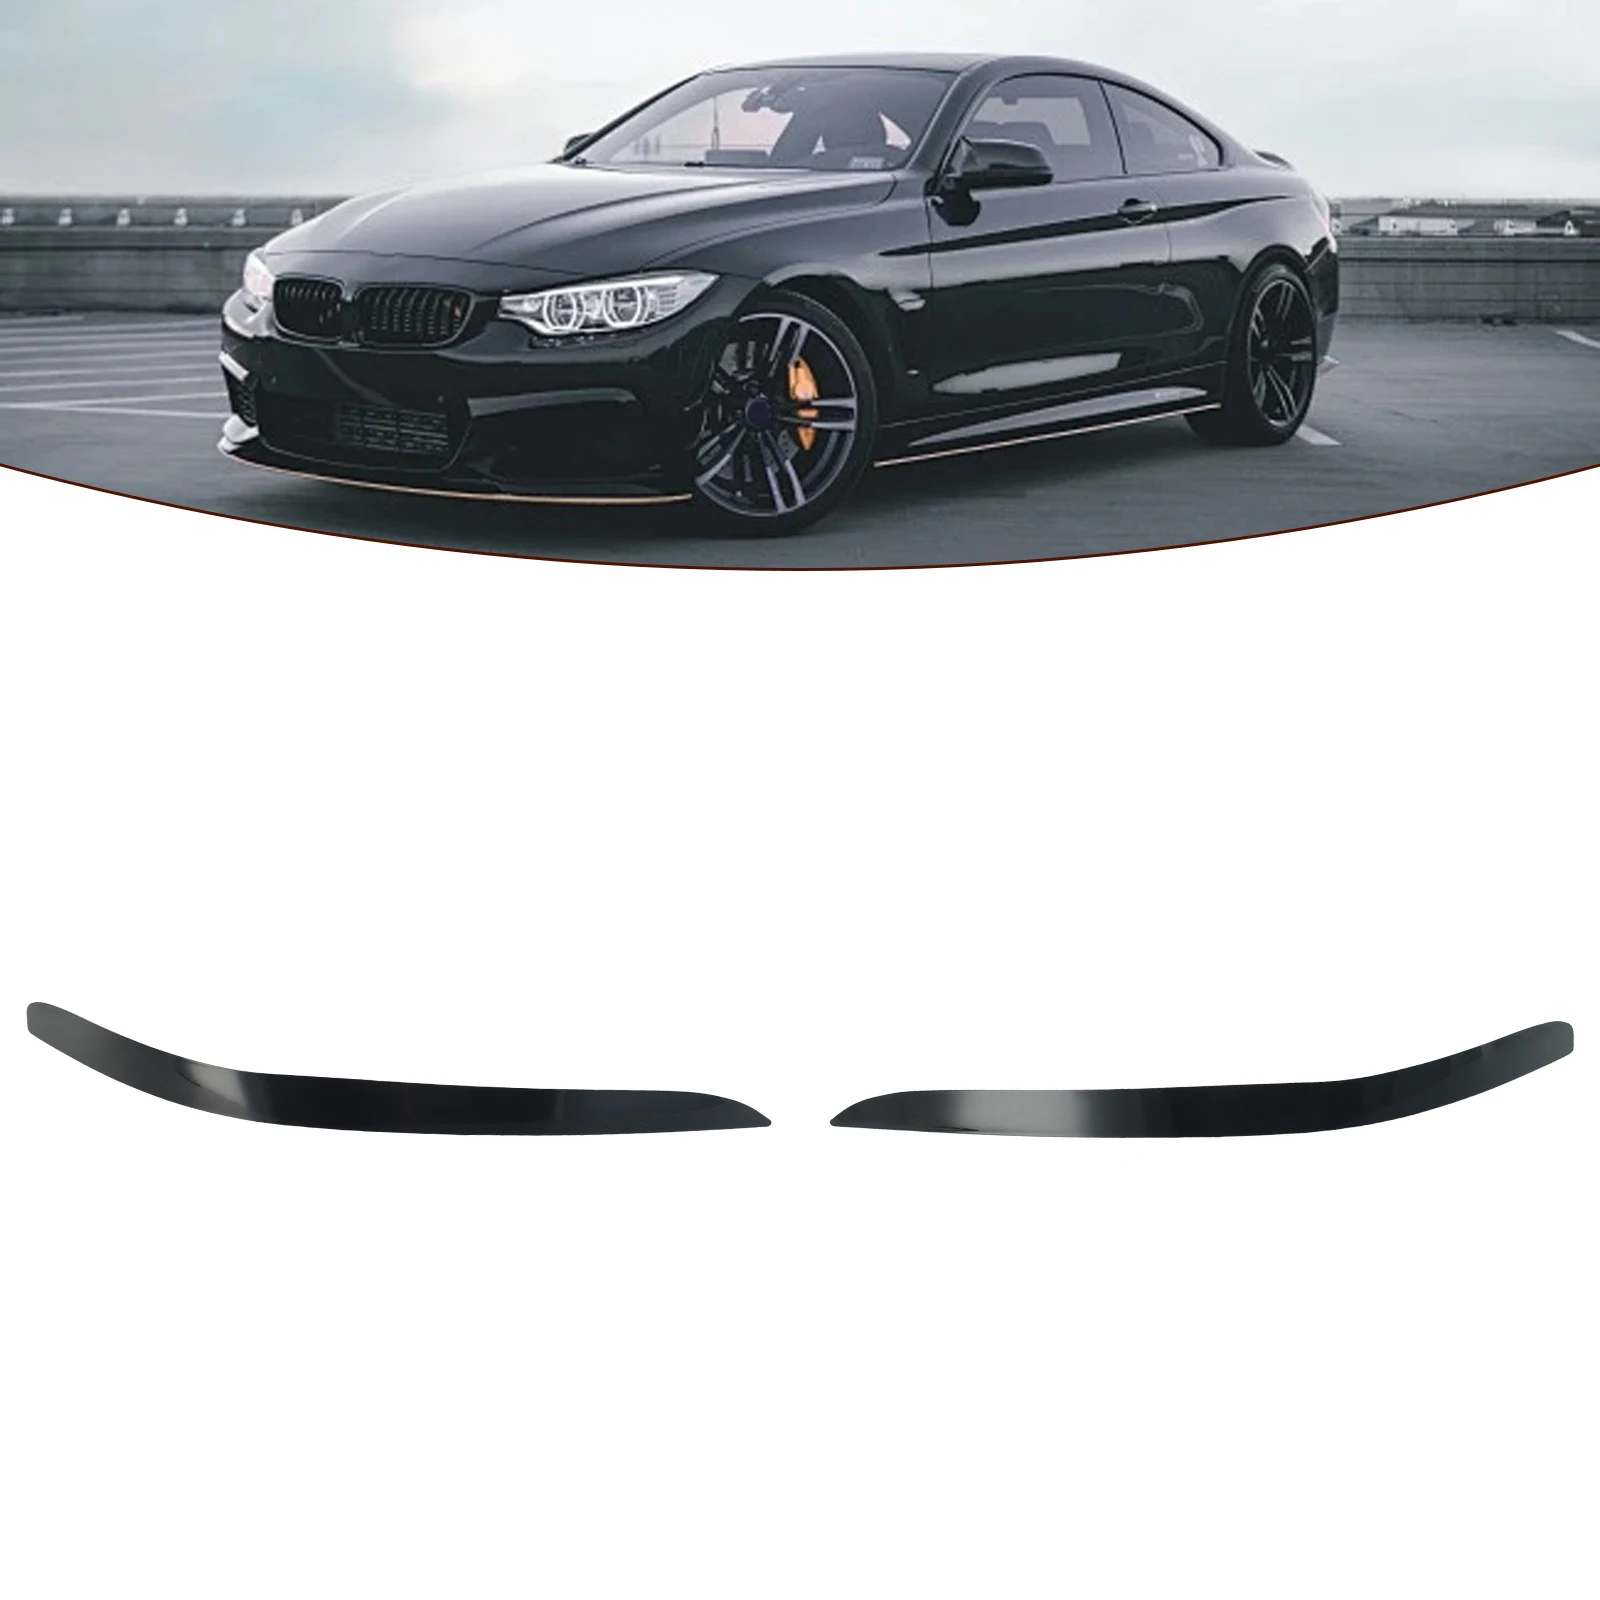 

2x Headlight Eyebrow ABS Material BA BF XR XR6 XR8 XT Durable Eyelid Cover Trim For Ford Falcon Front Gloss Black